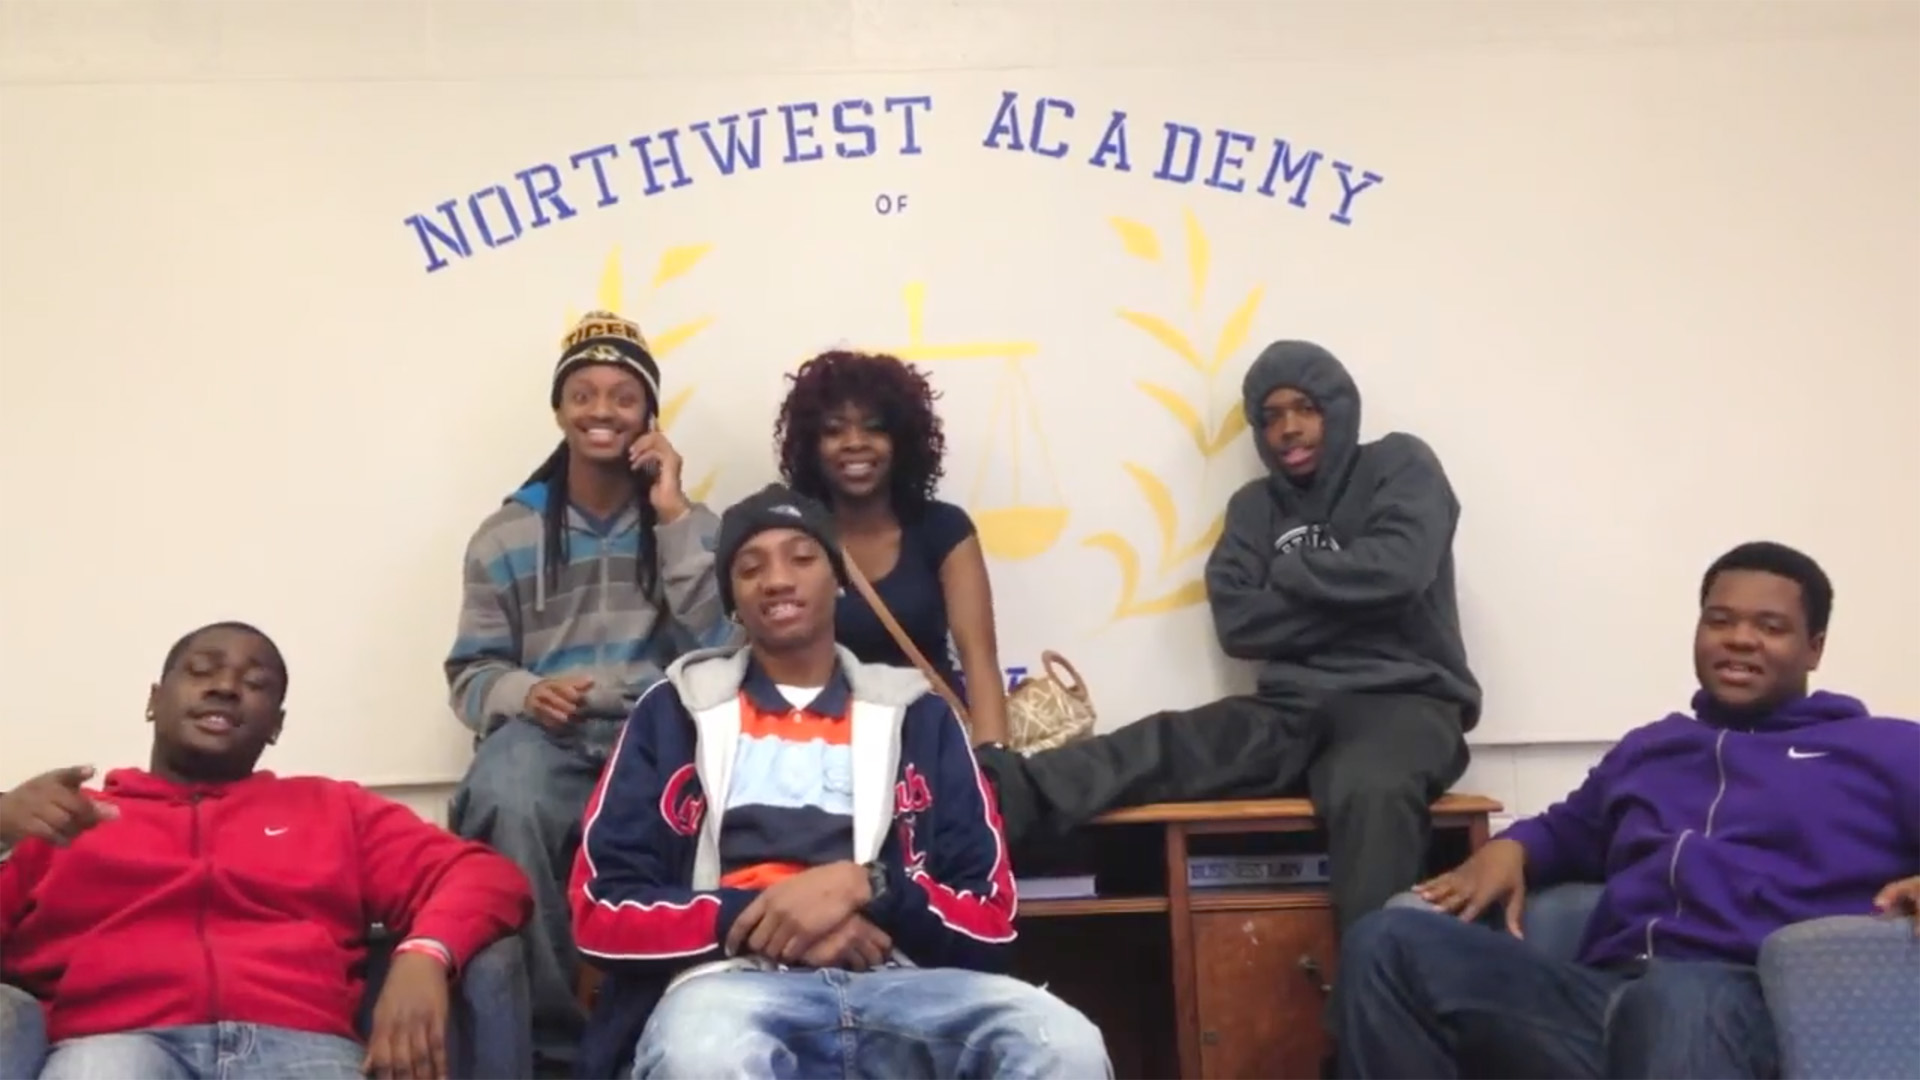 Six youth sitting together smiling at the camera at Northwest Academy